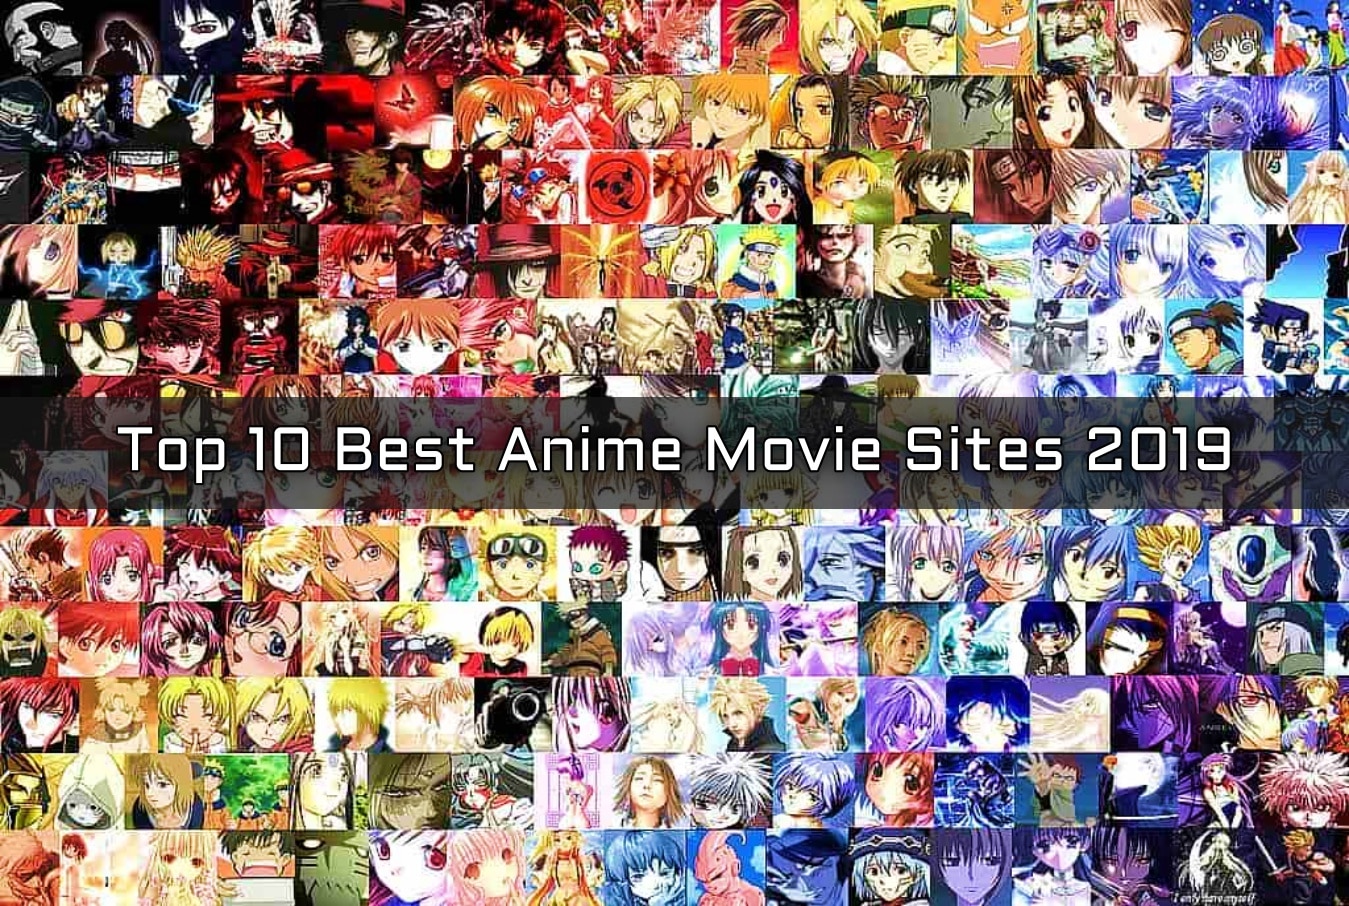 100 Best Anime Movies of All Time